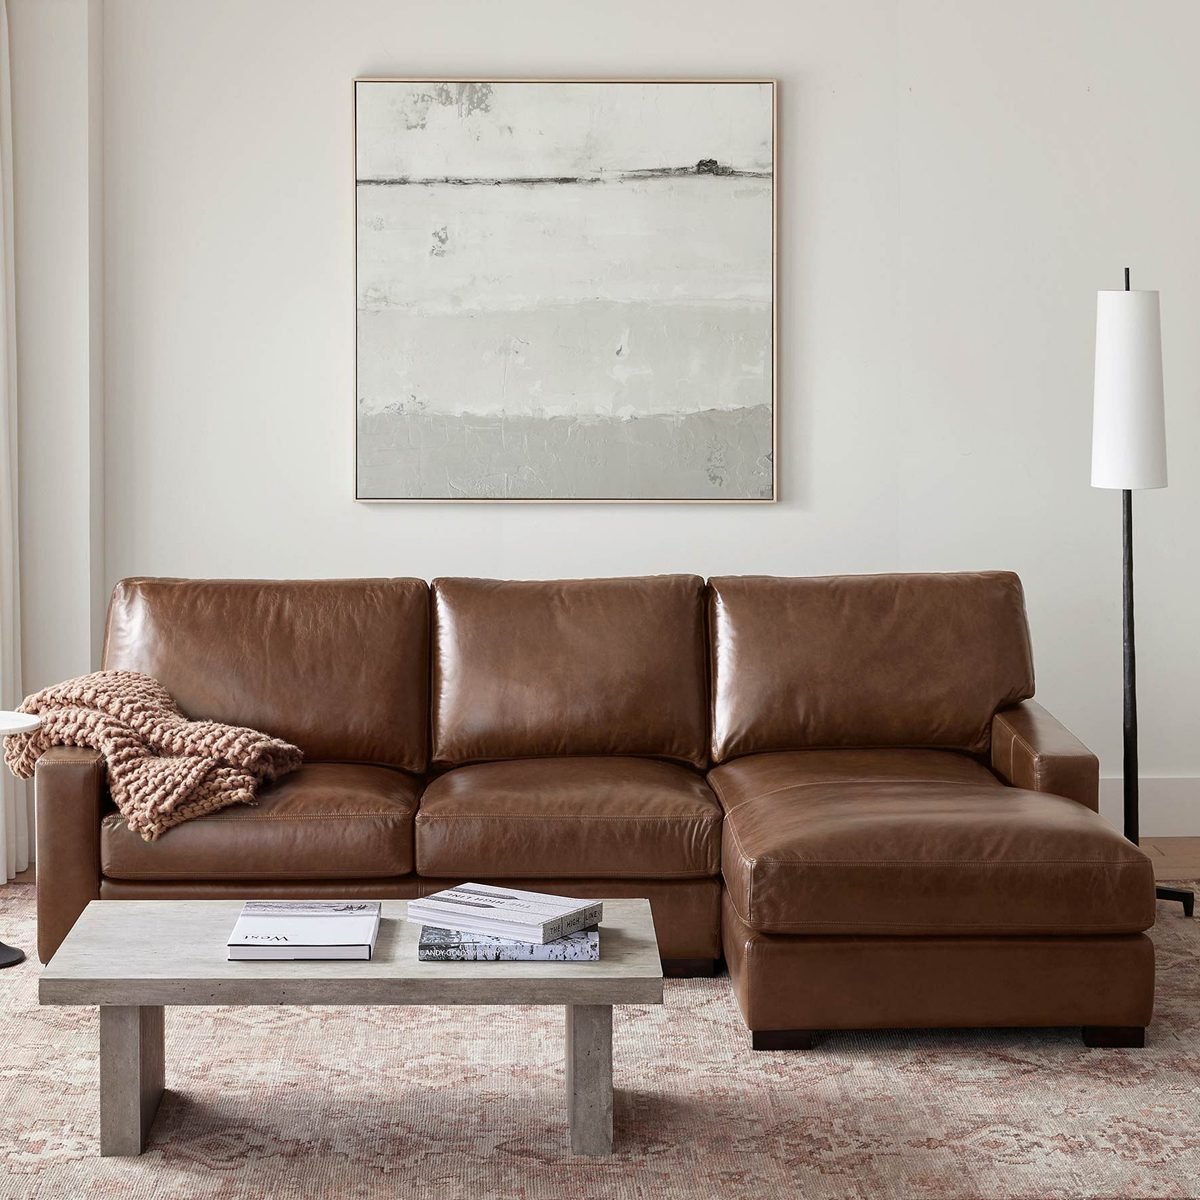 Turner Square Arm Leather Sofa Chaise Sectional Ecomm Potterybarn.com